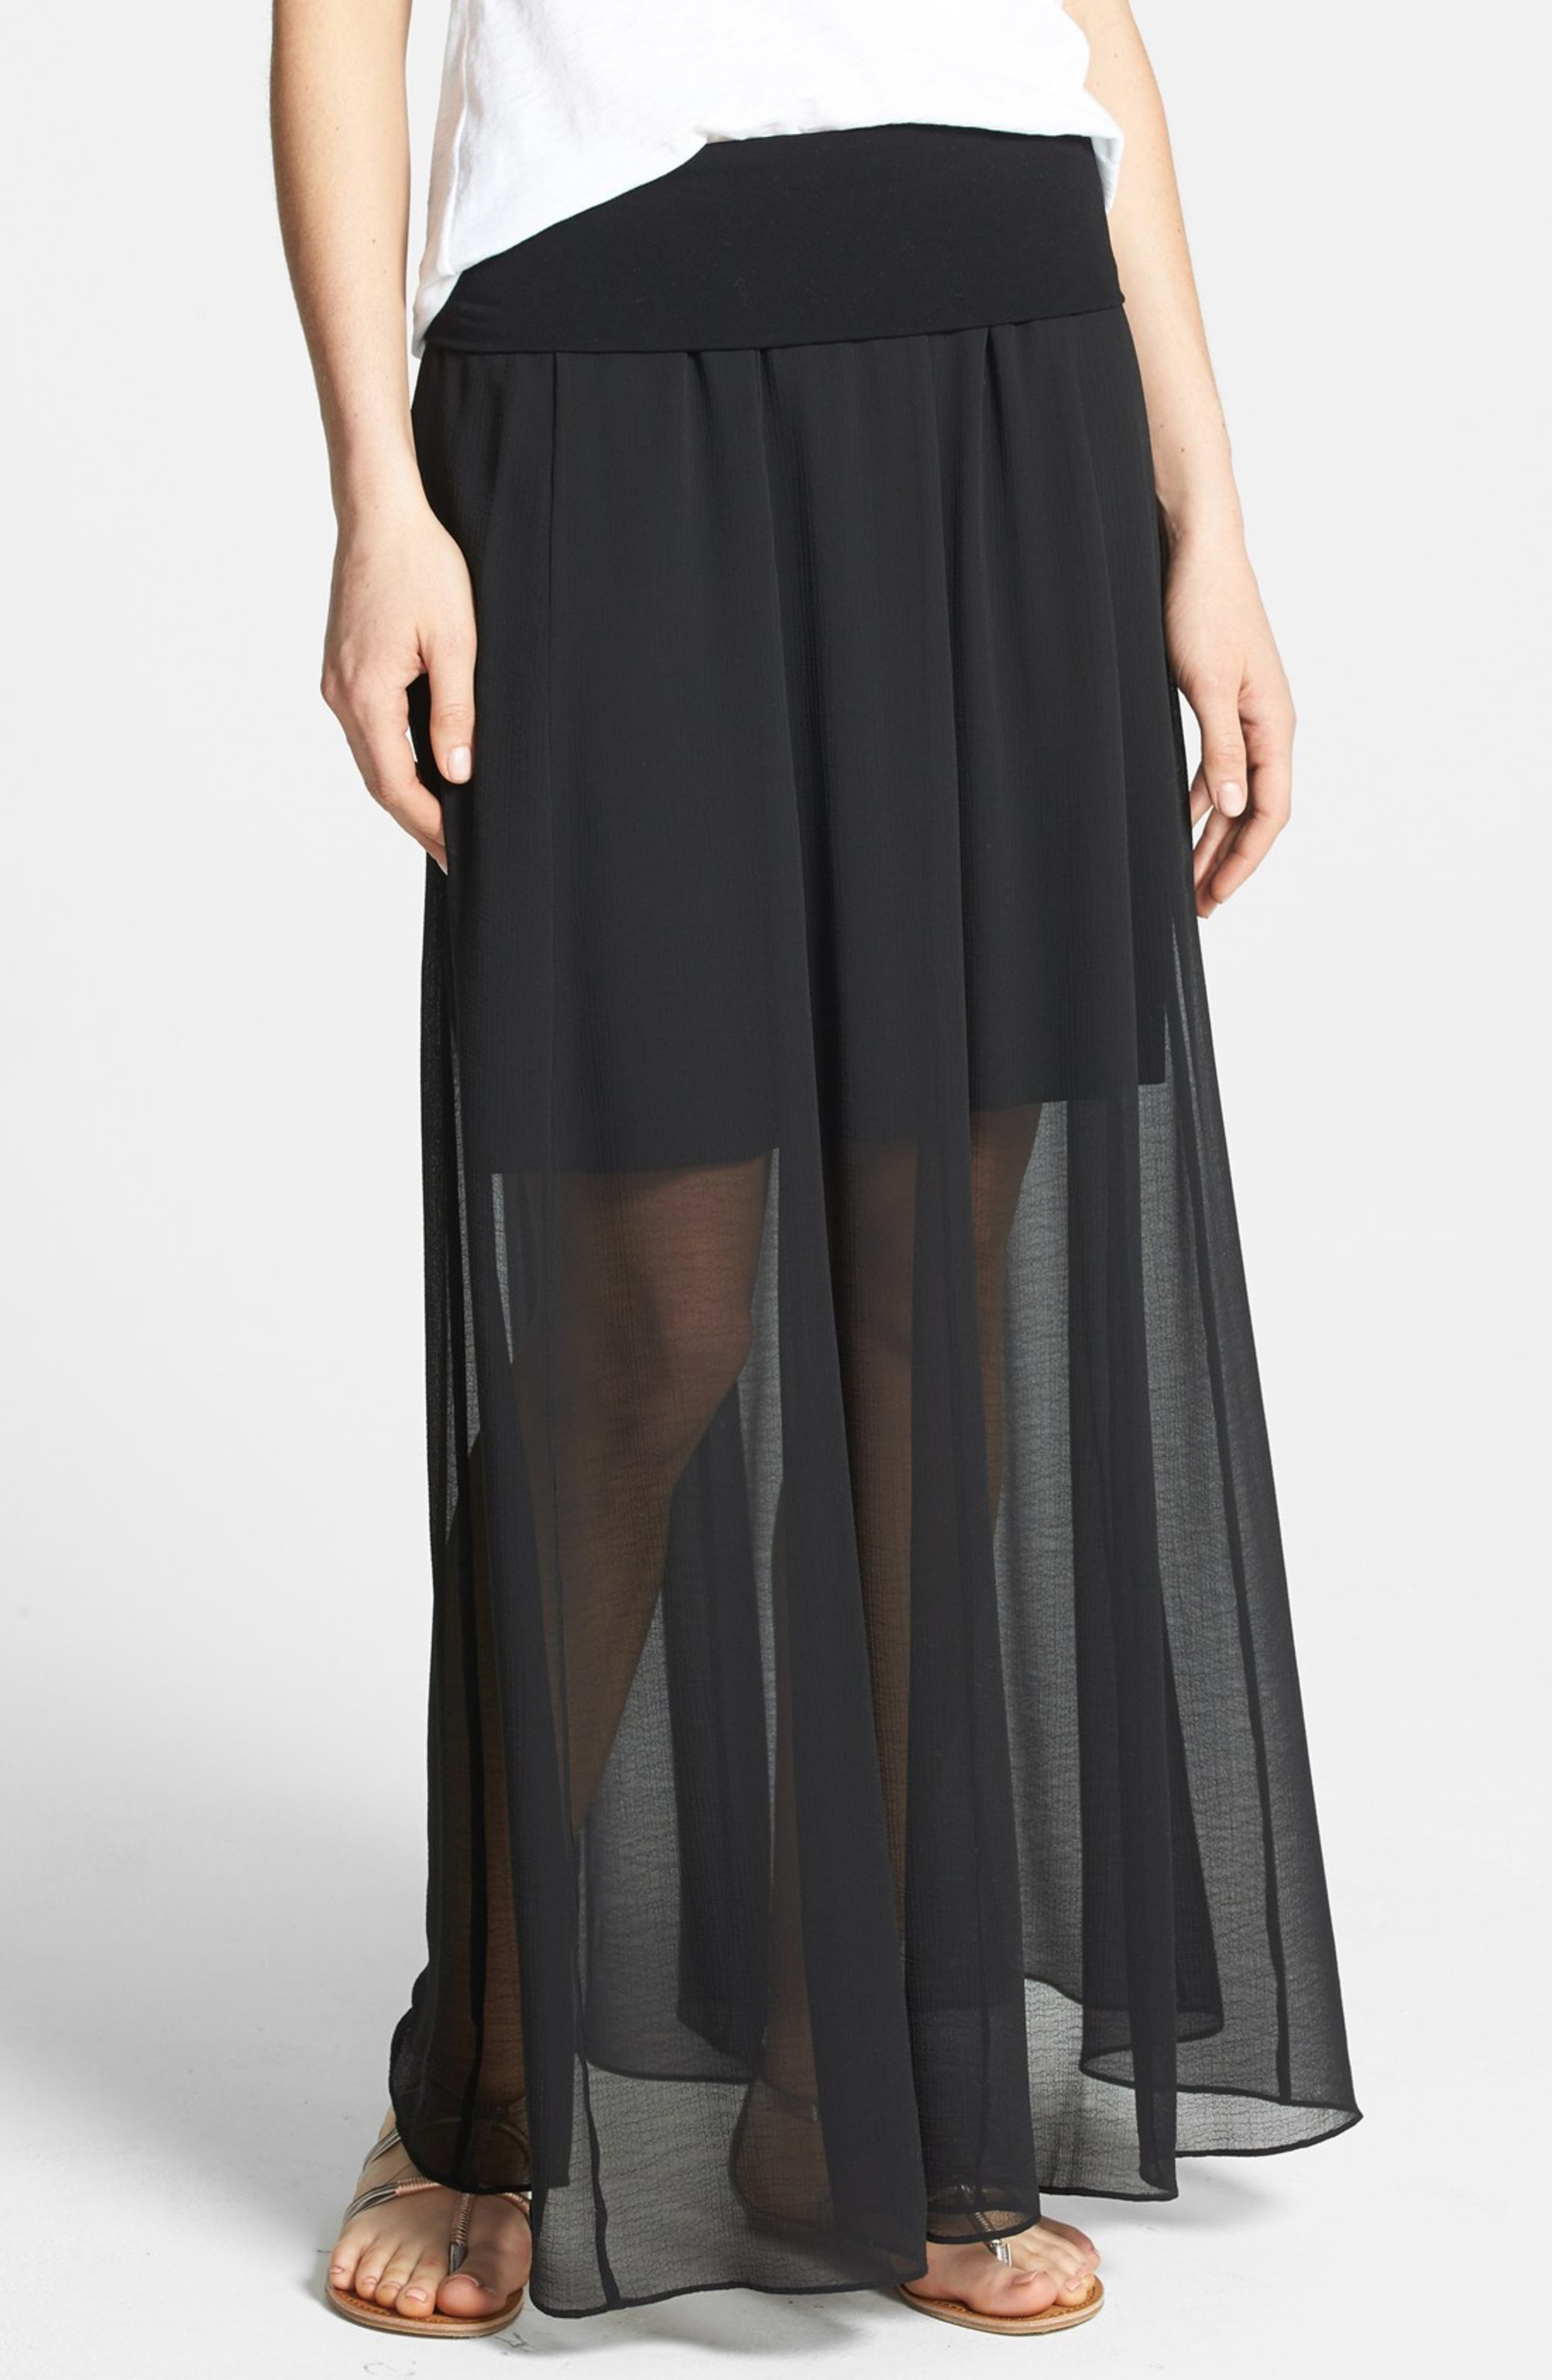 Vince Camuto Sheer Pleat Maxi Skirt | Nordstrom